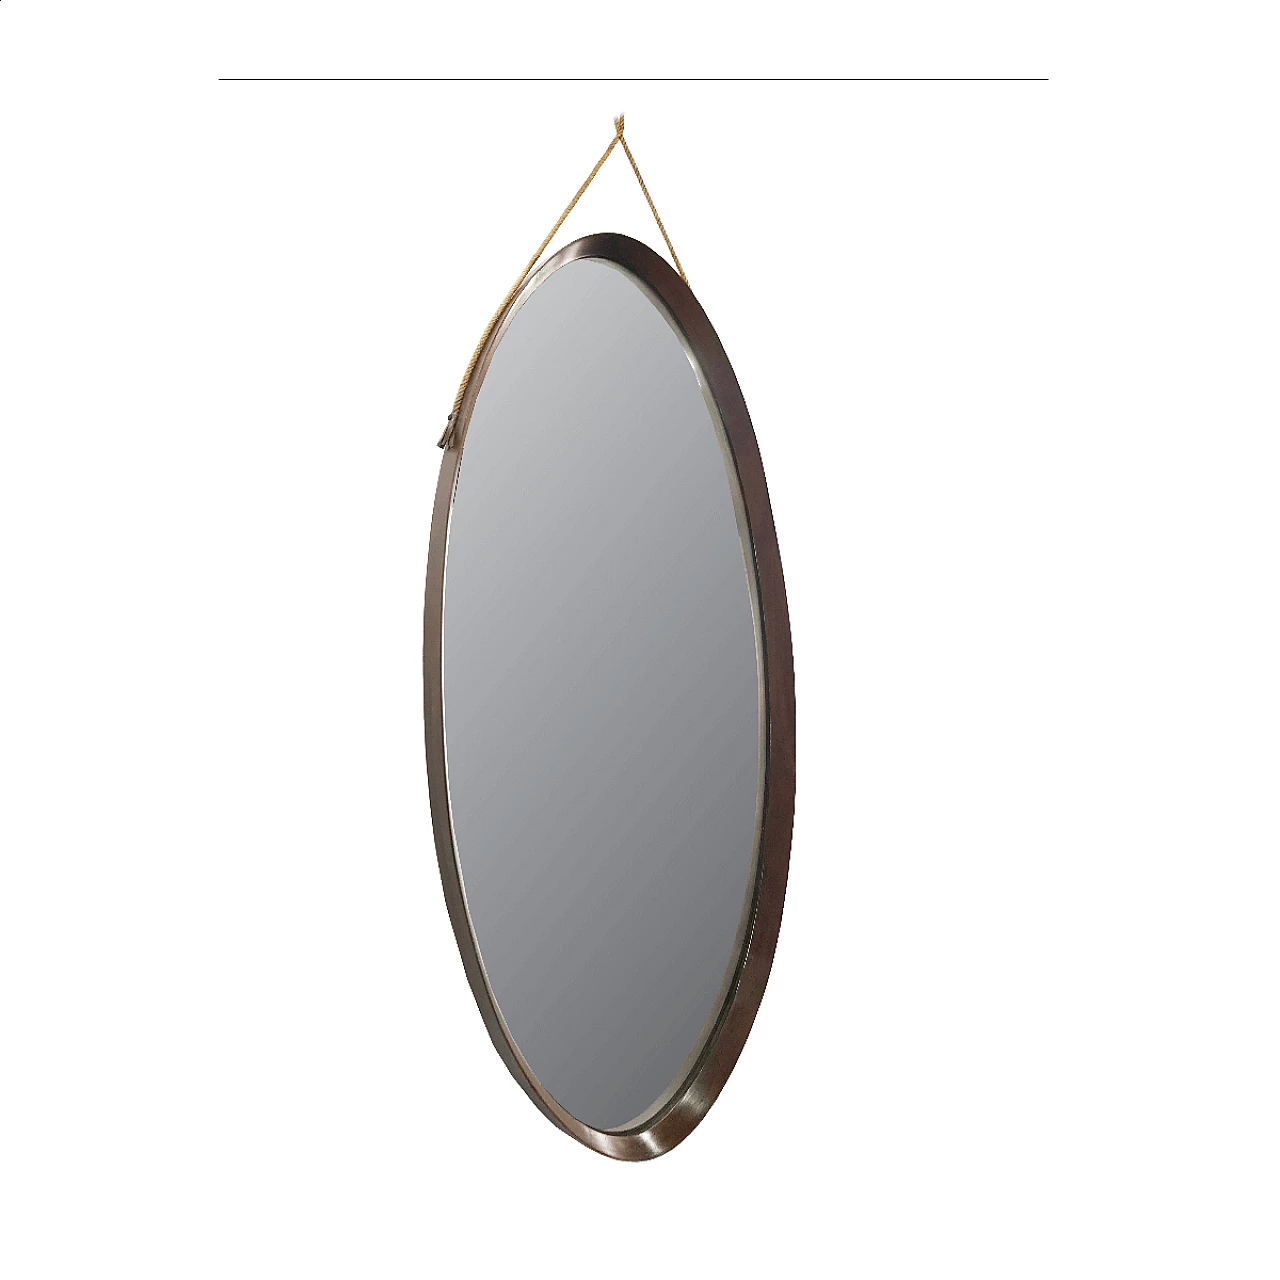 Oval mirror with wooden frame 1060622